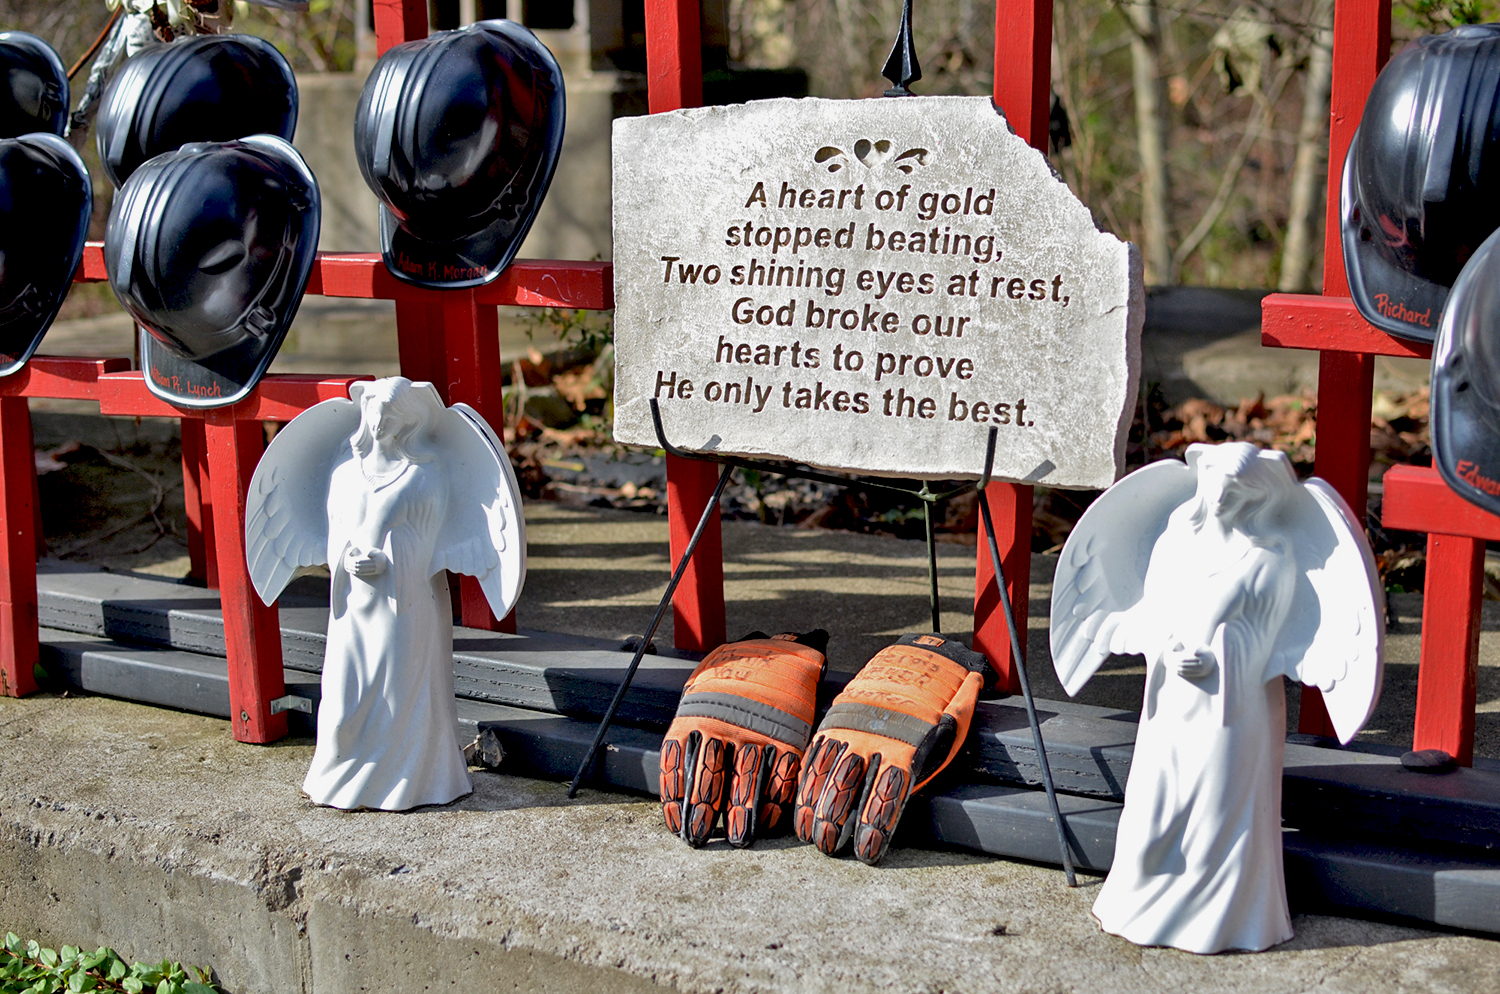 A memorial in a West Virginia hollow pays homage to the 29 coal miners who were killed in the Upper Big Branch disaster in 2010.